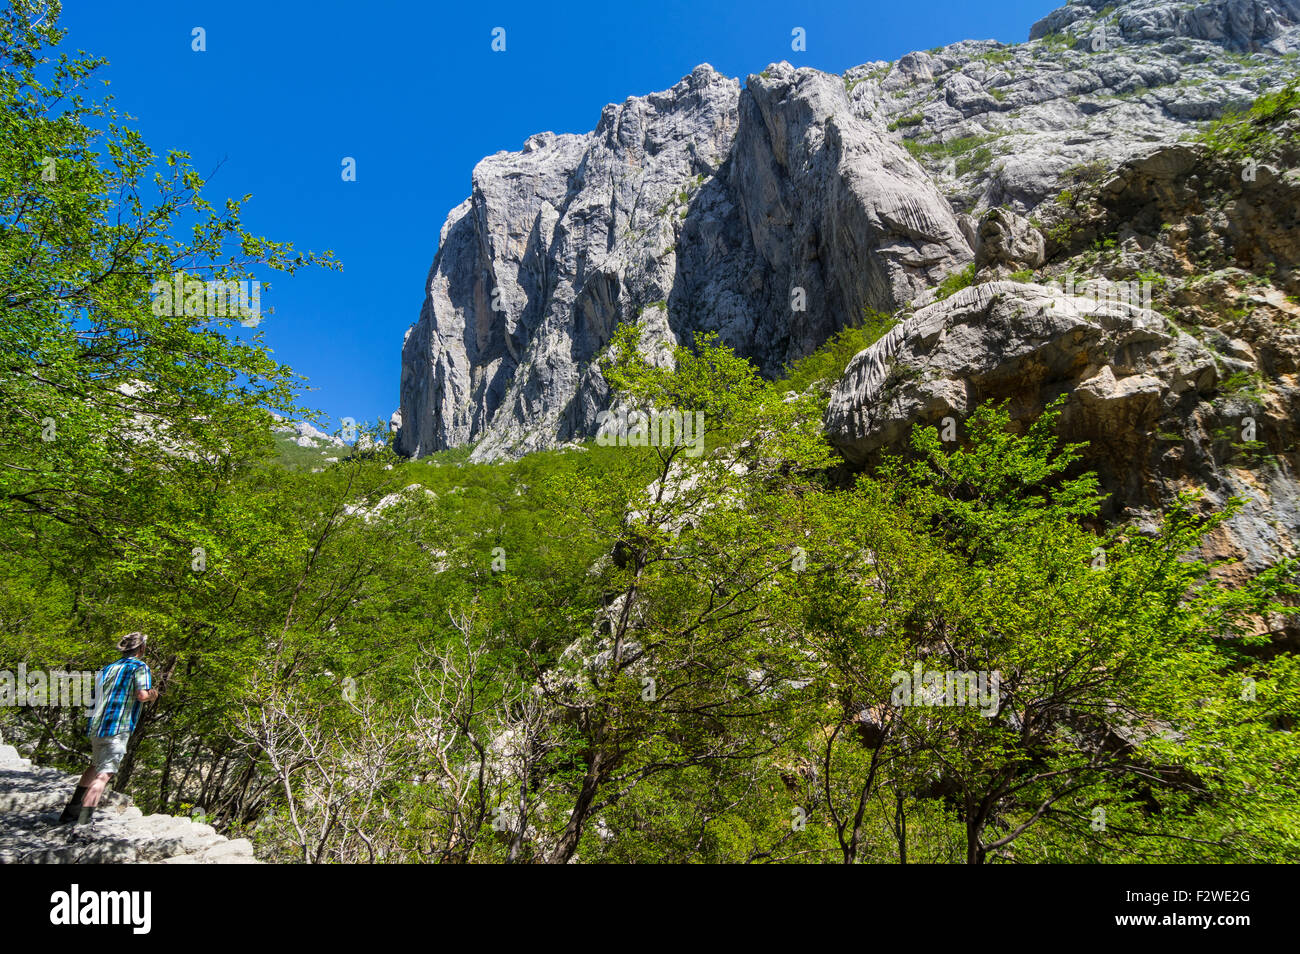 Hiking in the canyon of National park Paklenica, Croatia Stock Photo